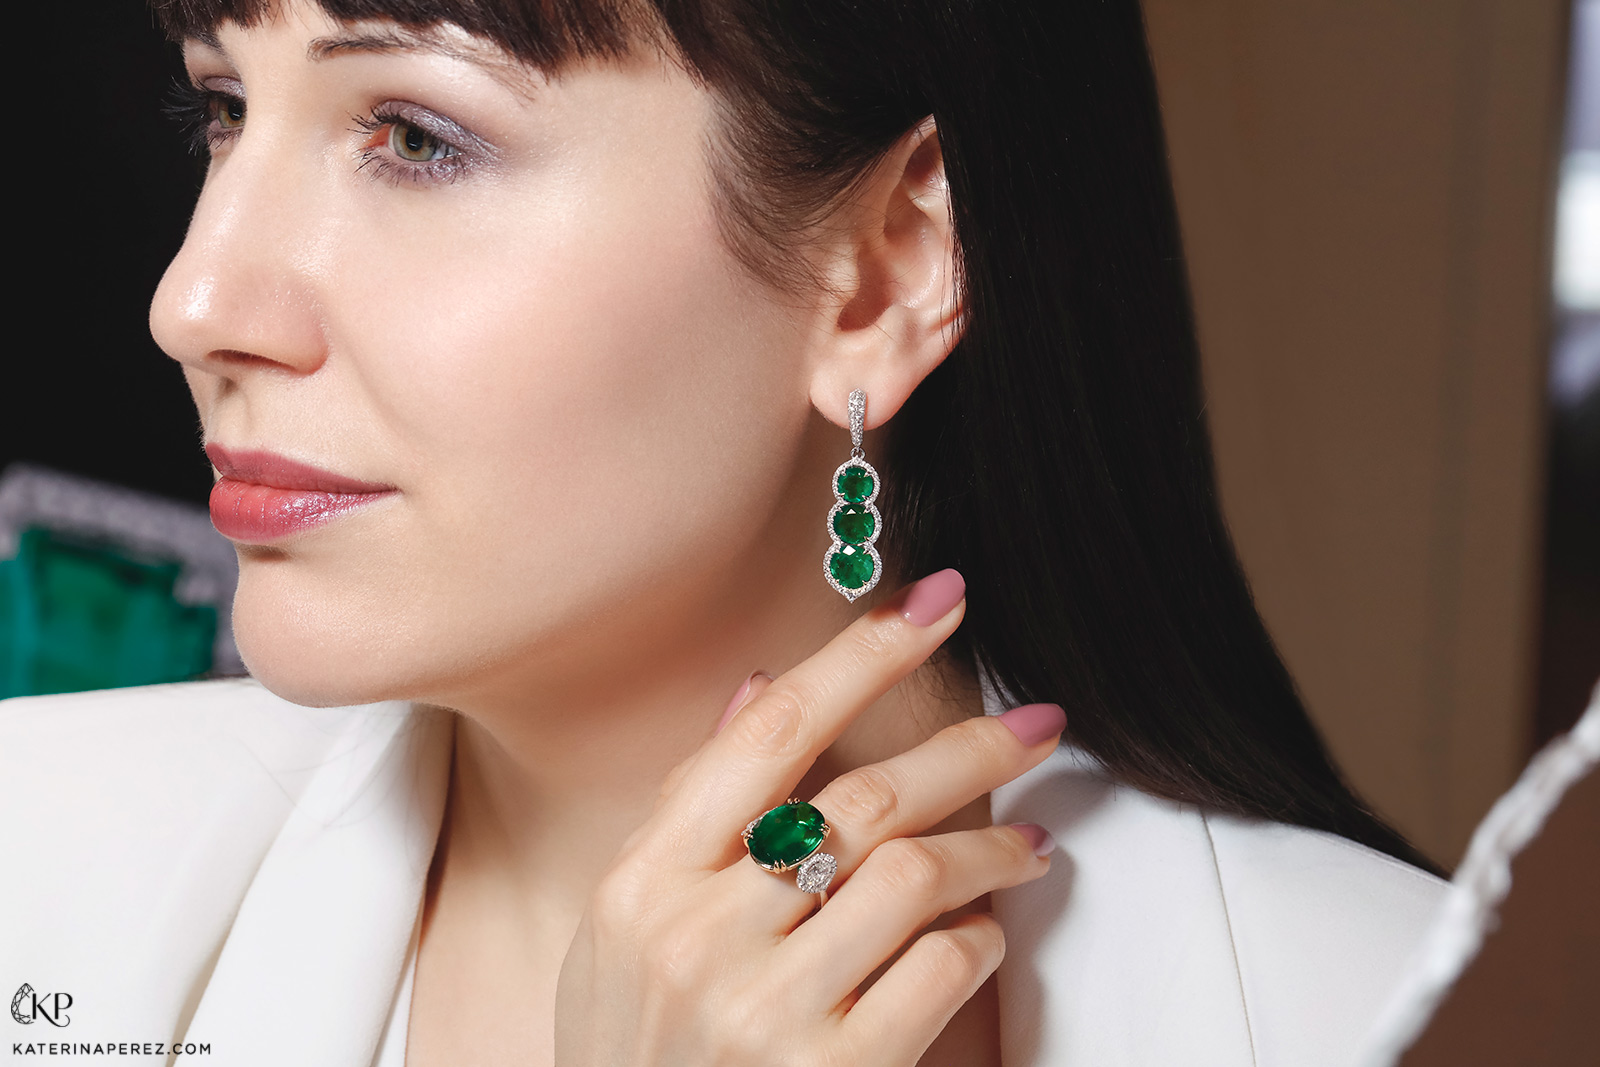 Inbar Afghani 10.44ct emerald ring and earrings with diamonds